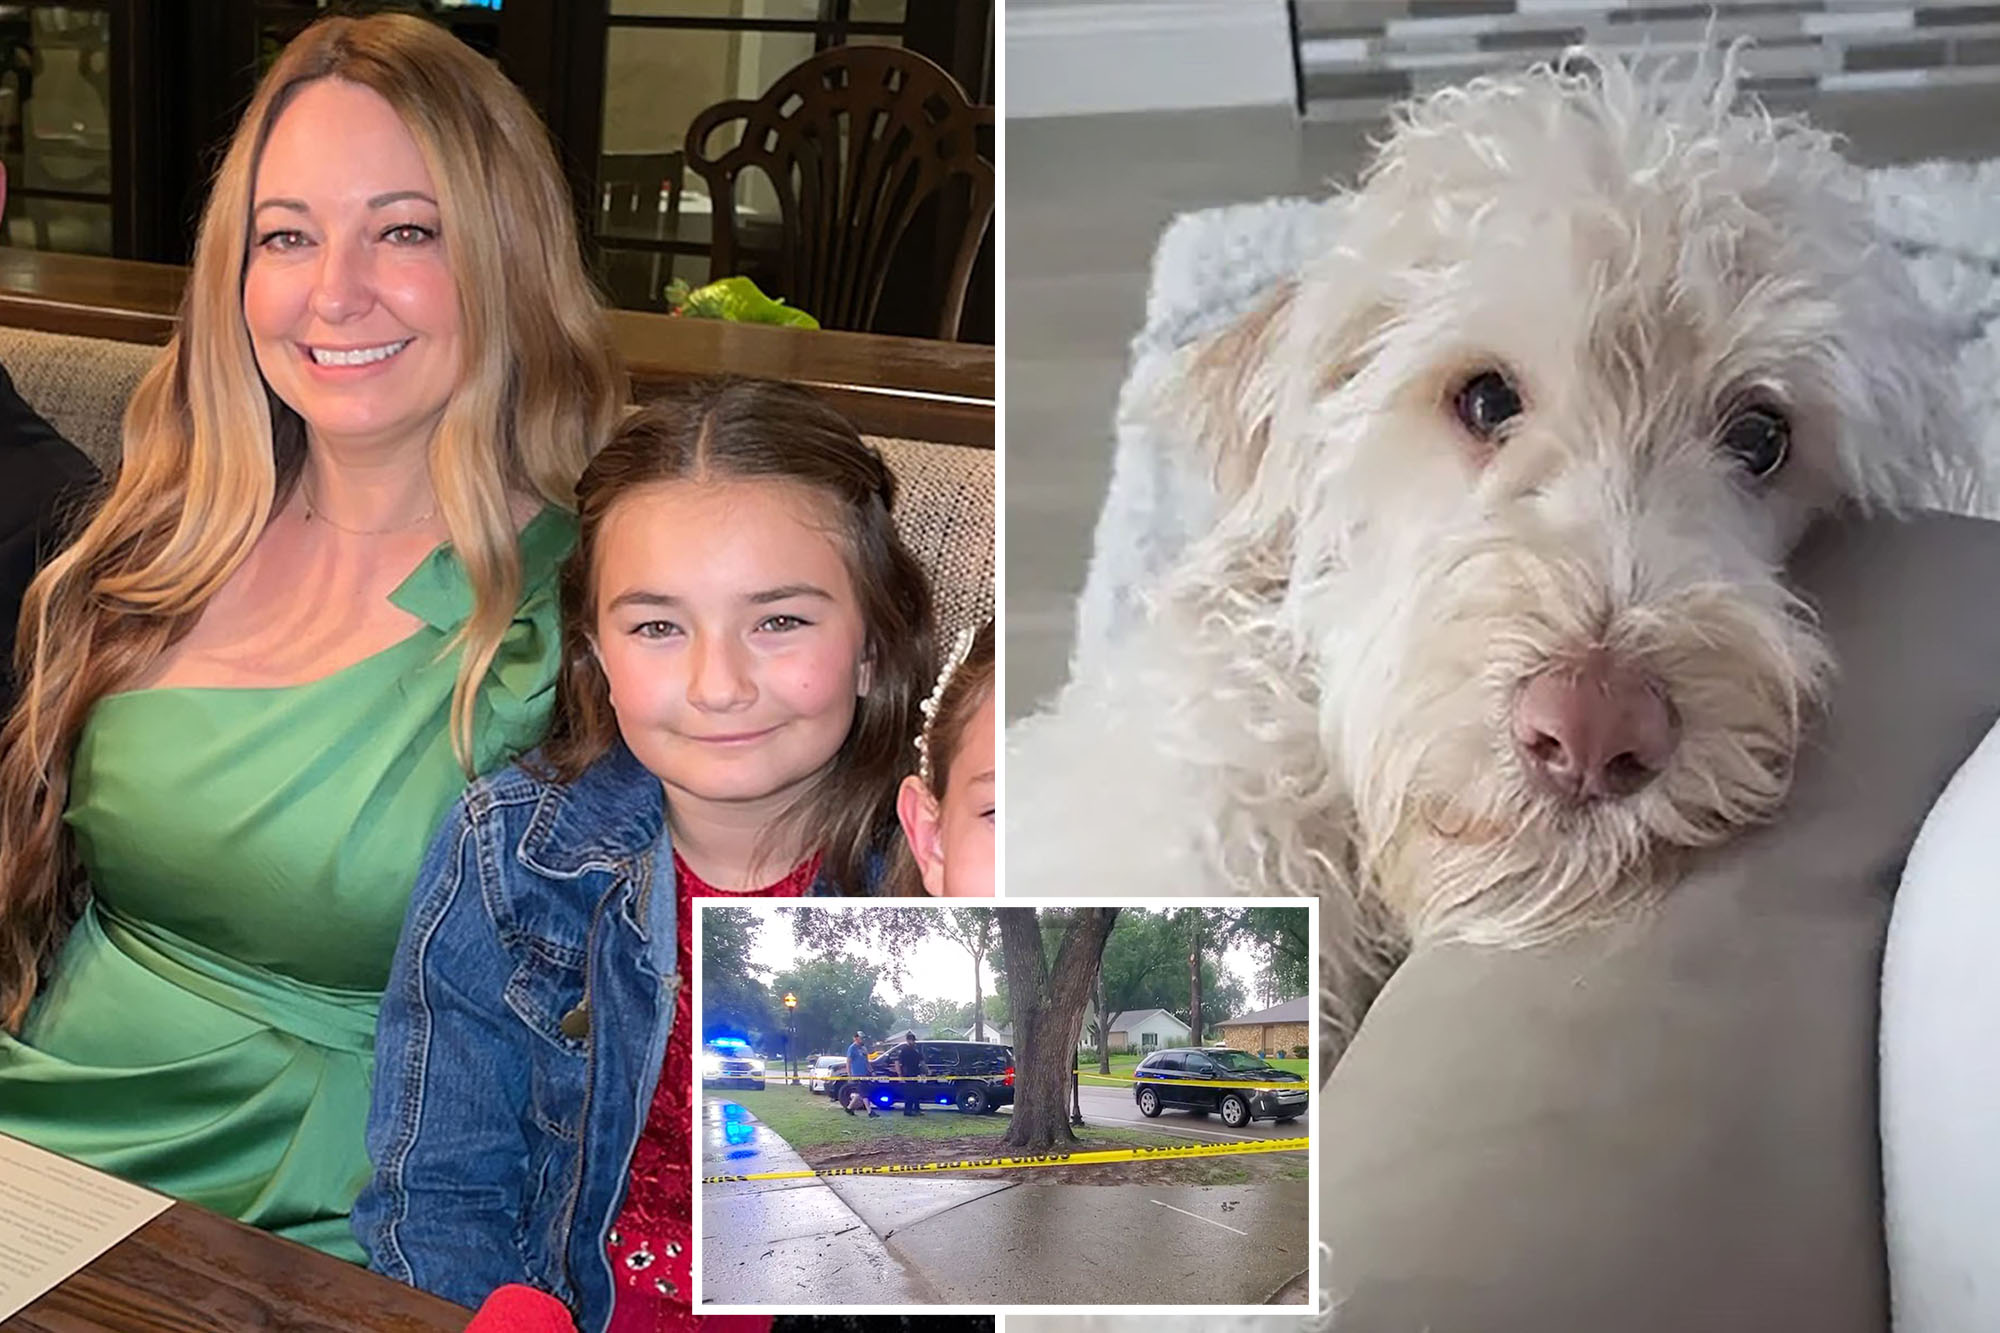 New 911 calls have been released after lightning struck a mother, her young daughter and their family dog at a Winter Springs park this week. Tragically, the mother was killed.